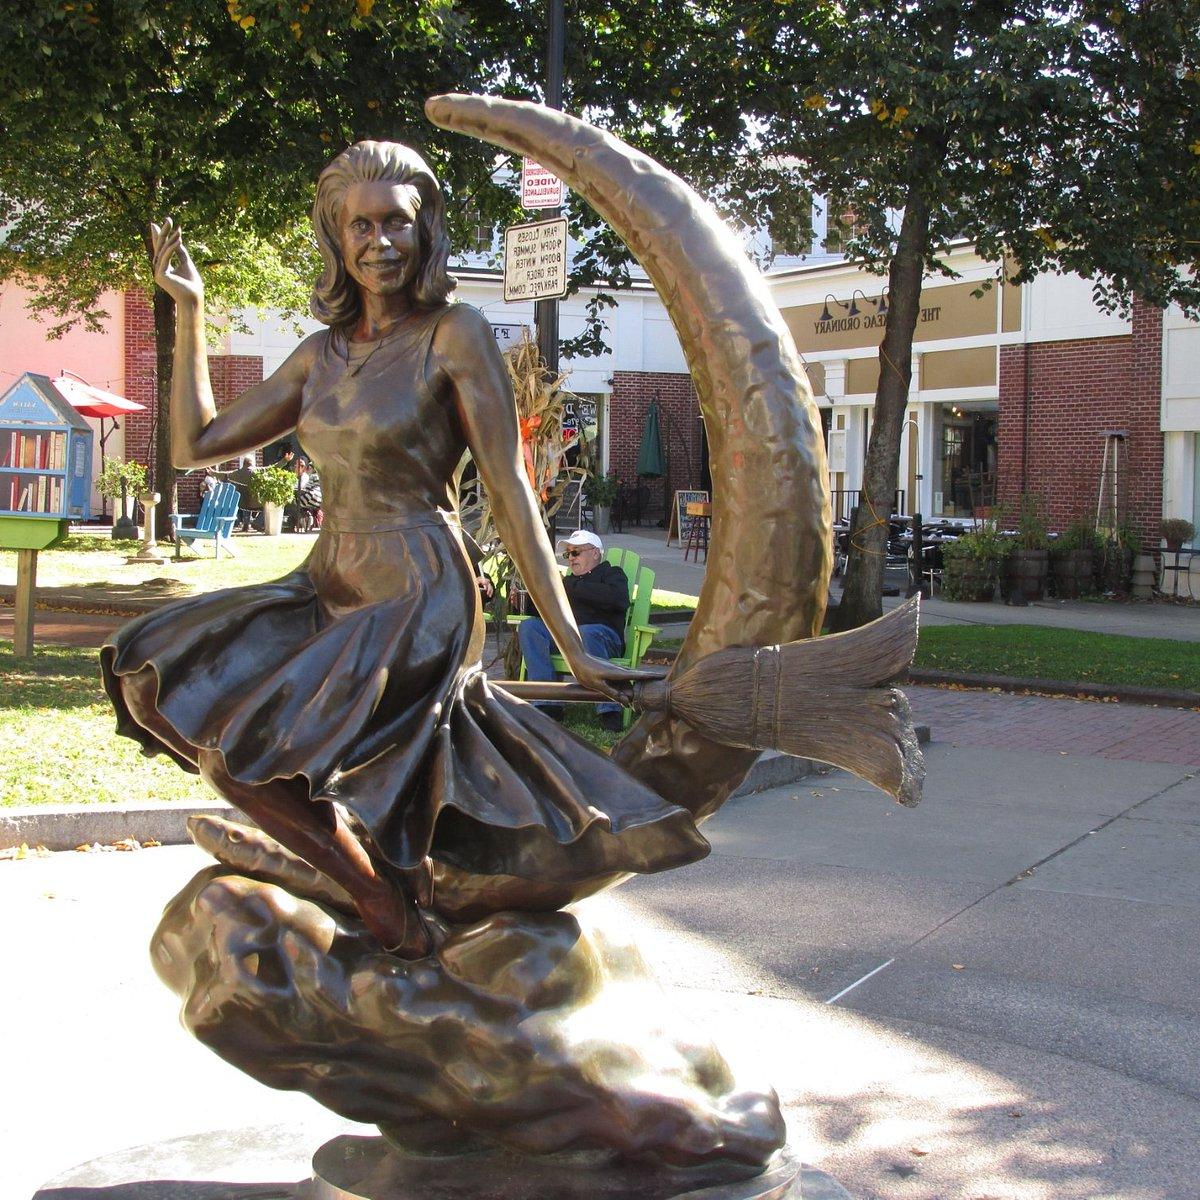 A bronze statue of a woman riding a broom in front of a crescent moon